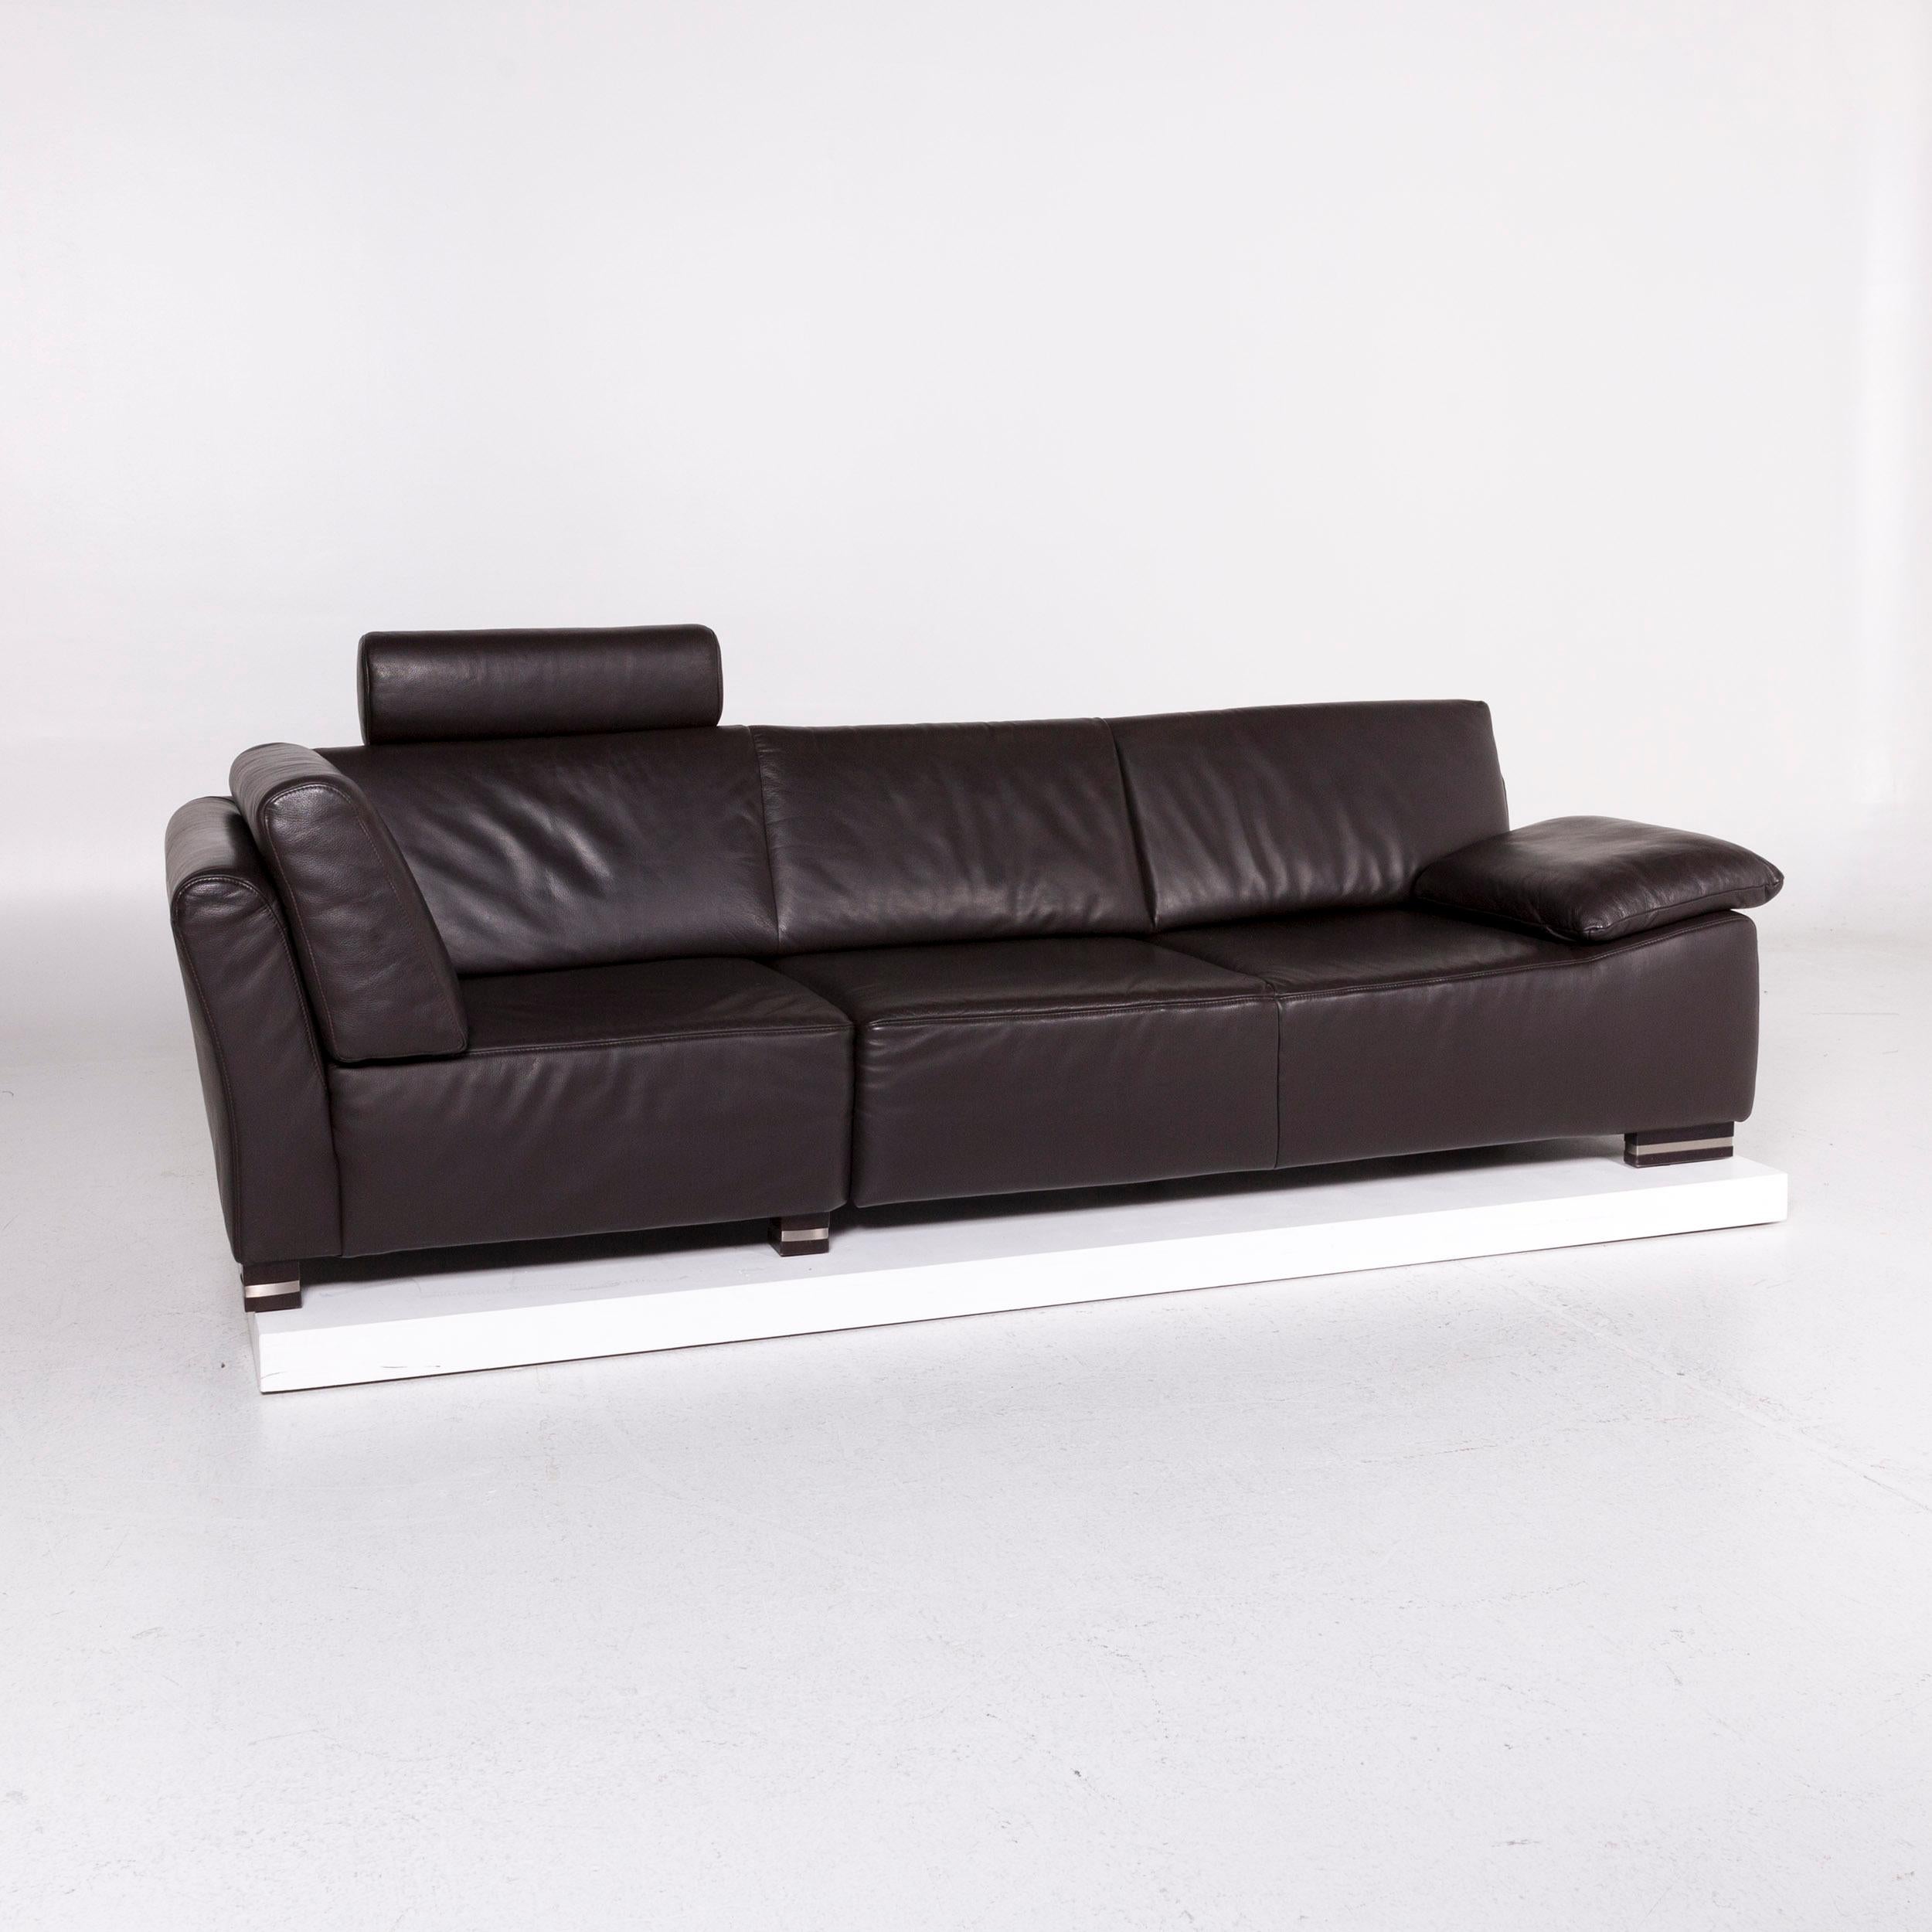 We bring to you an Ewald Schillig Bentley leather sofa set brown dark brown 1 three-seat 1.

 Product measurements in centimeters:
 
Depth 96
Width 264
Height 75
Seat-height 38
Rest-height 54
Seat-depth 56
Seat-width 183
Back-height